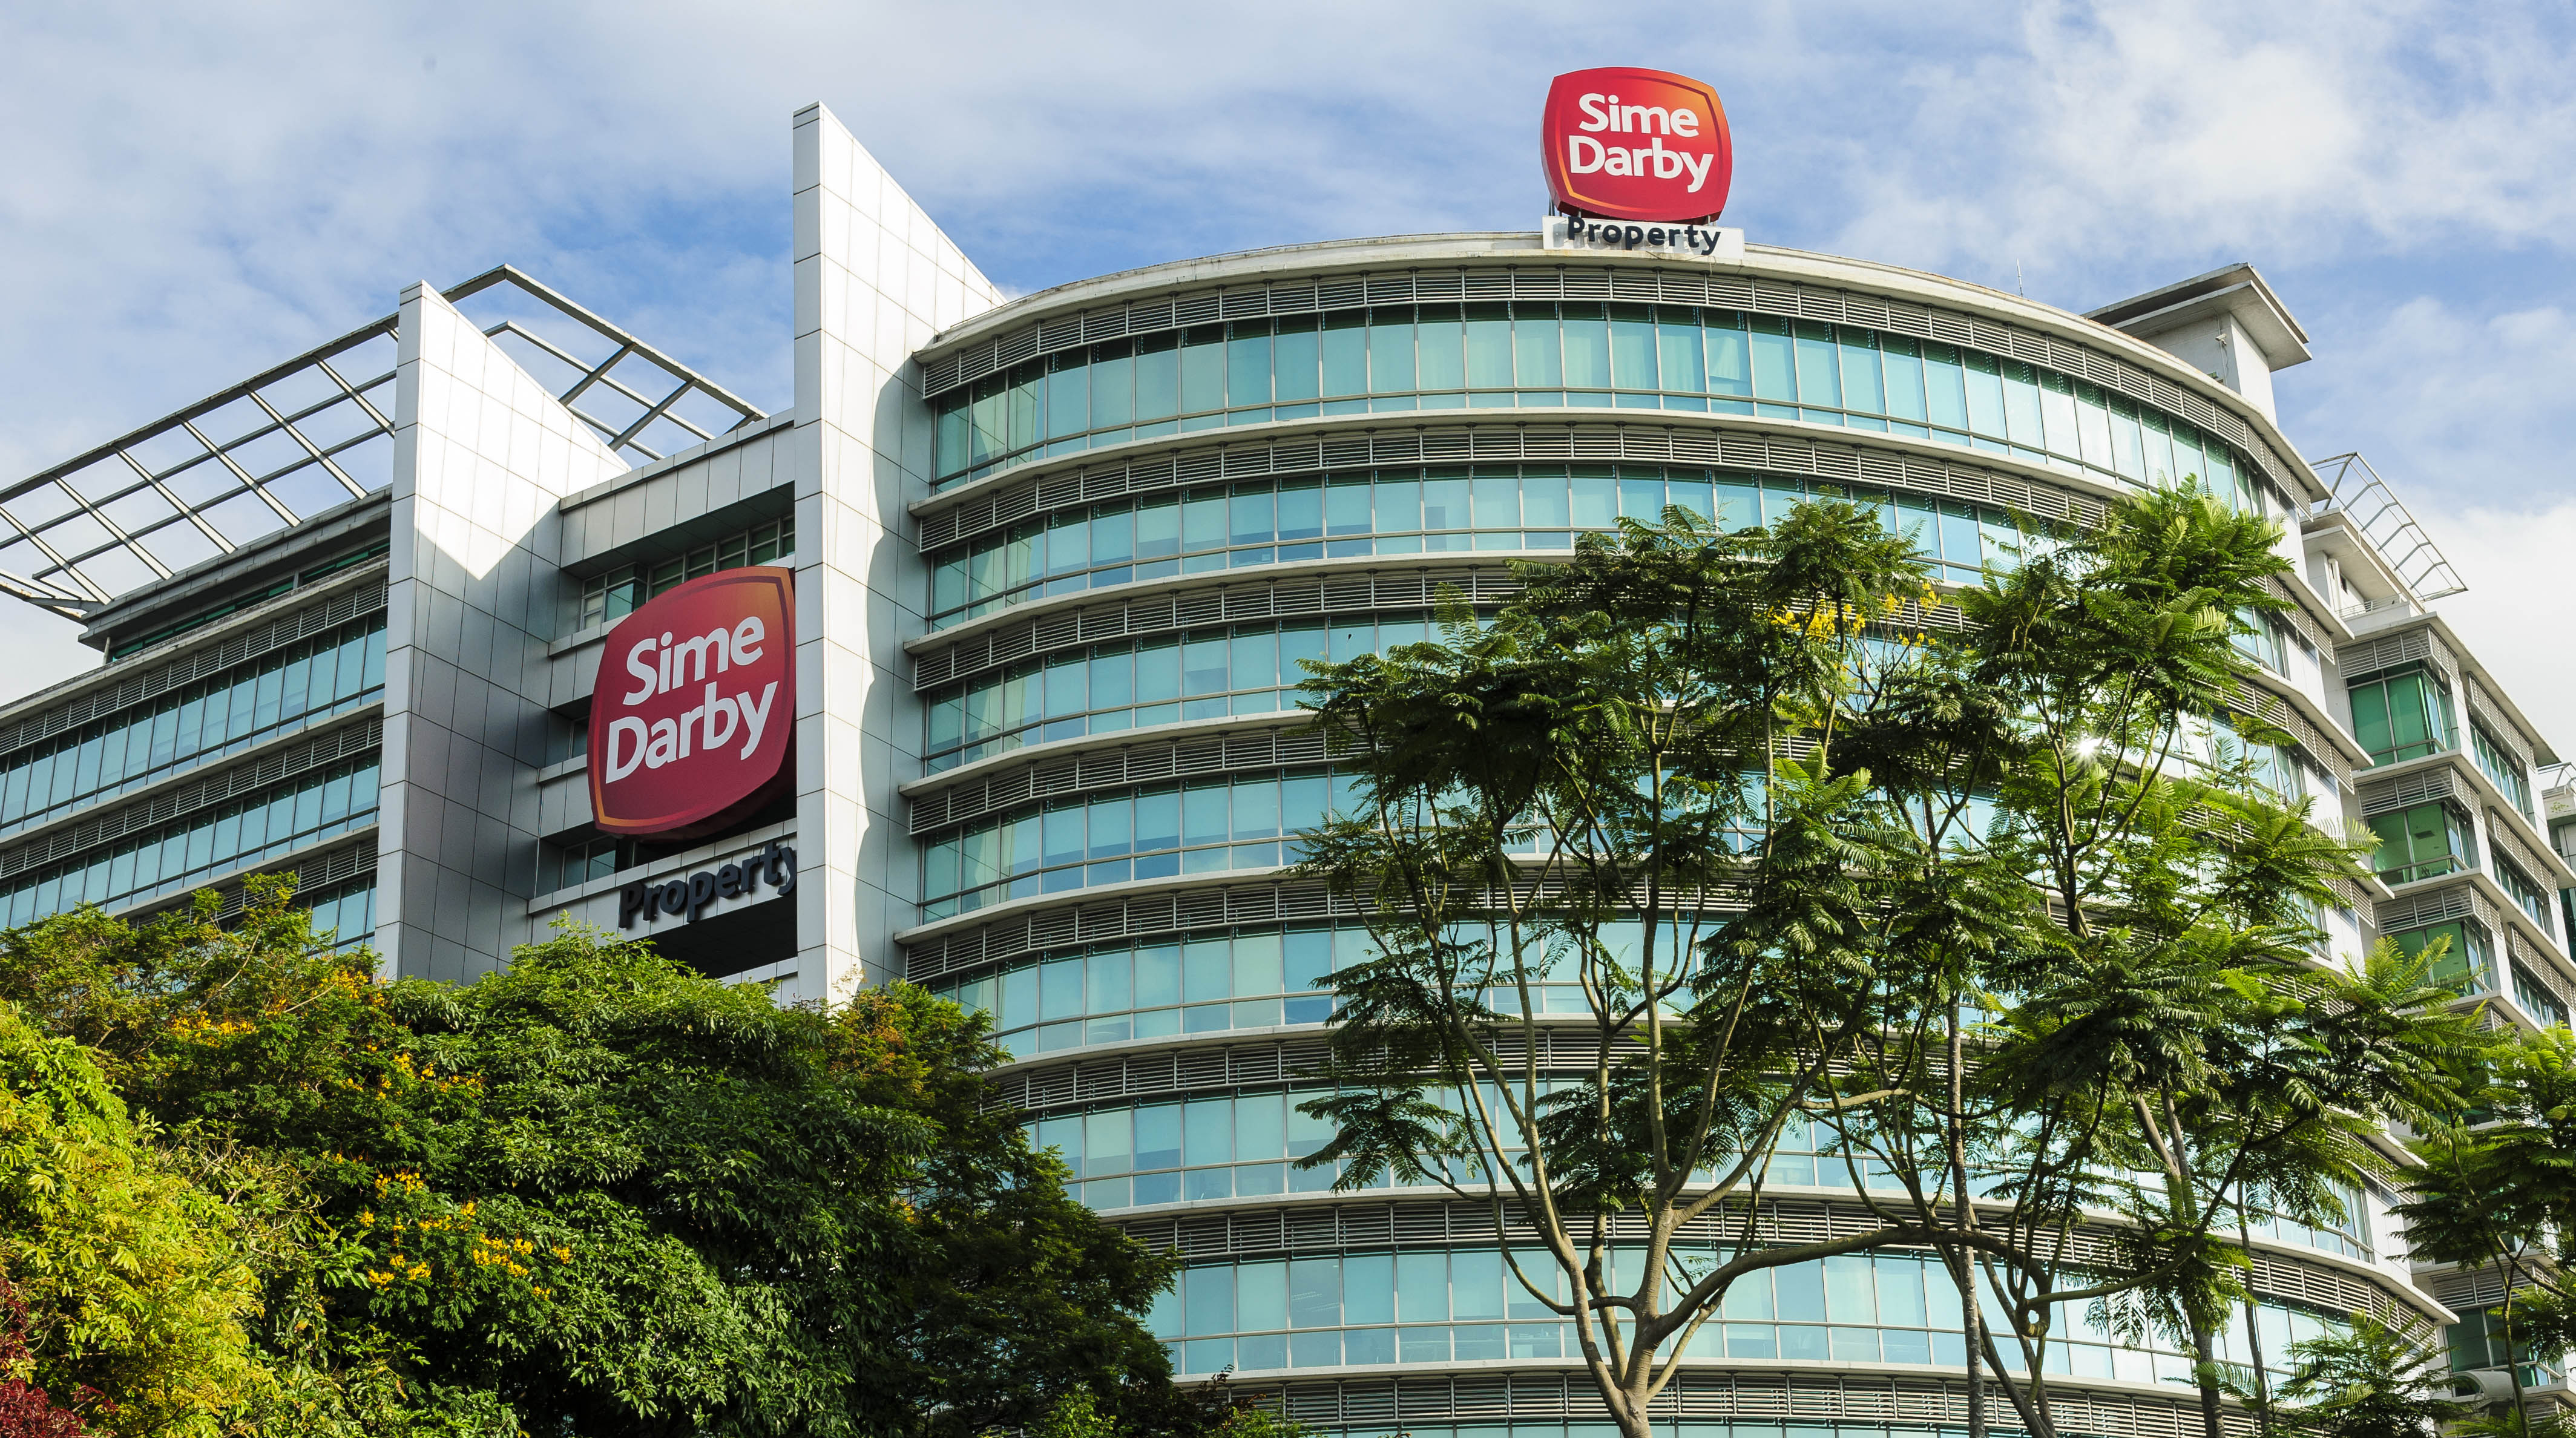 Sime Darby Property is exploring rooftop solar solutions with 1,000 residential landed units as a pilot in the City of Elmina, Shah Alam, leading the way for green townships and further carbon emissions reduction.  